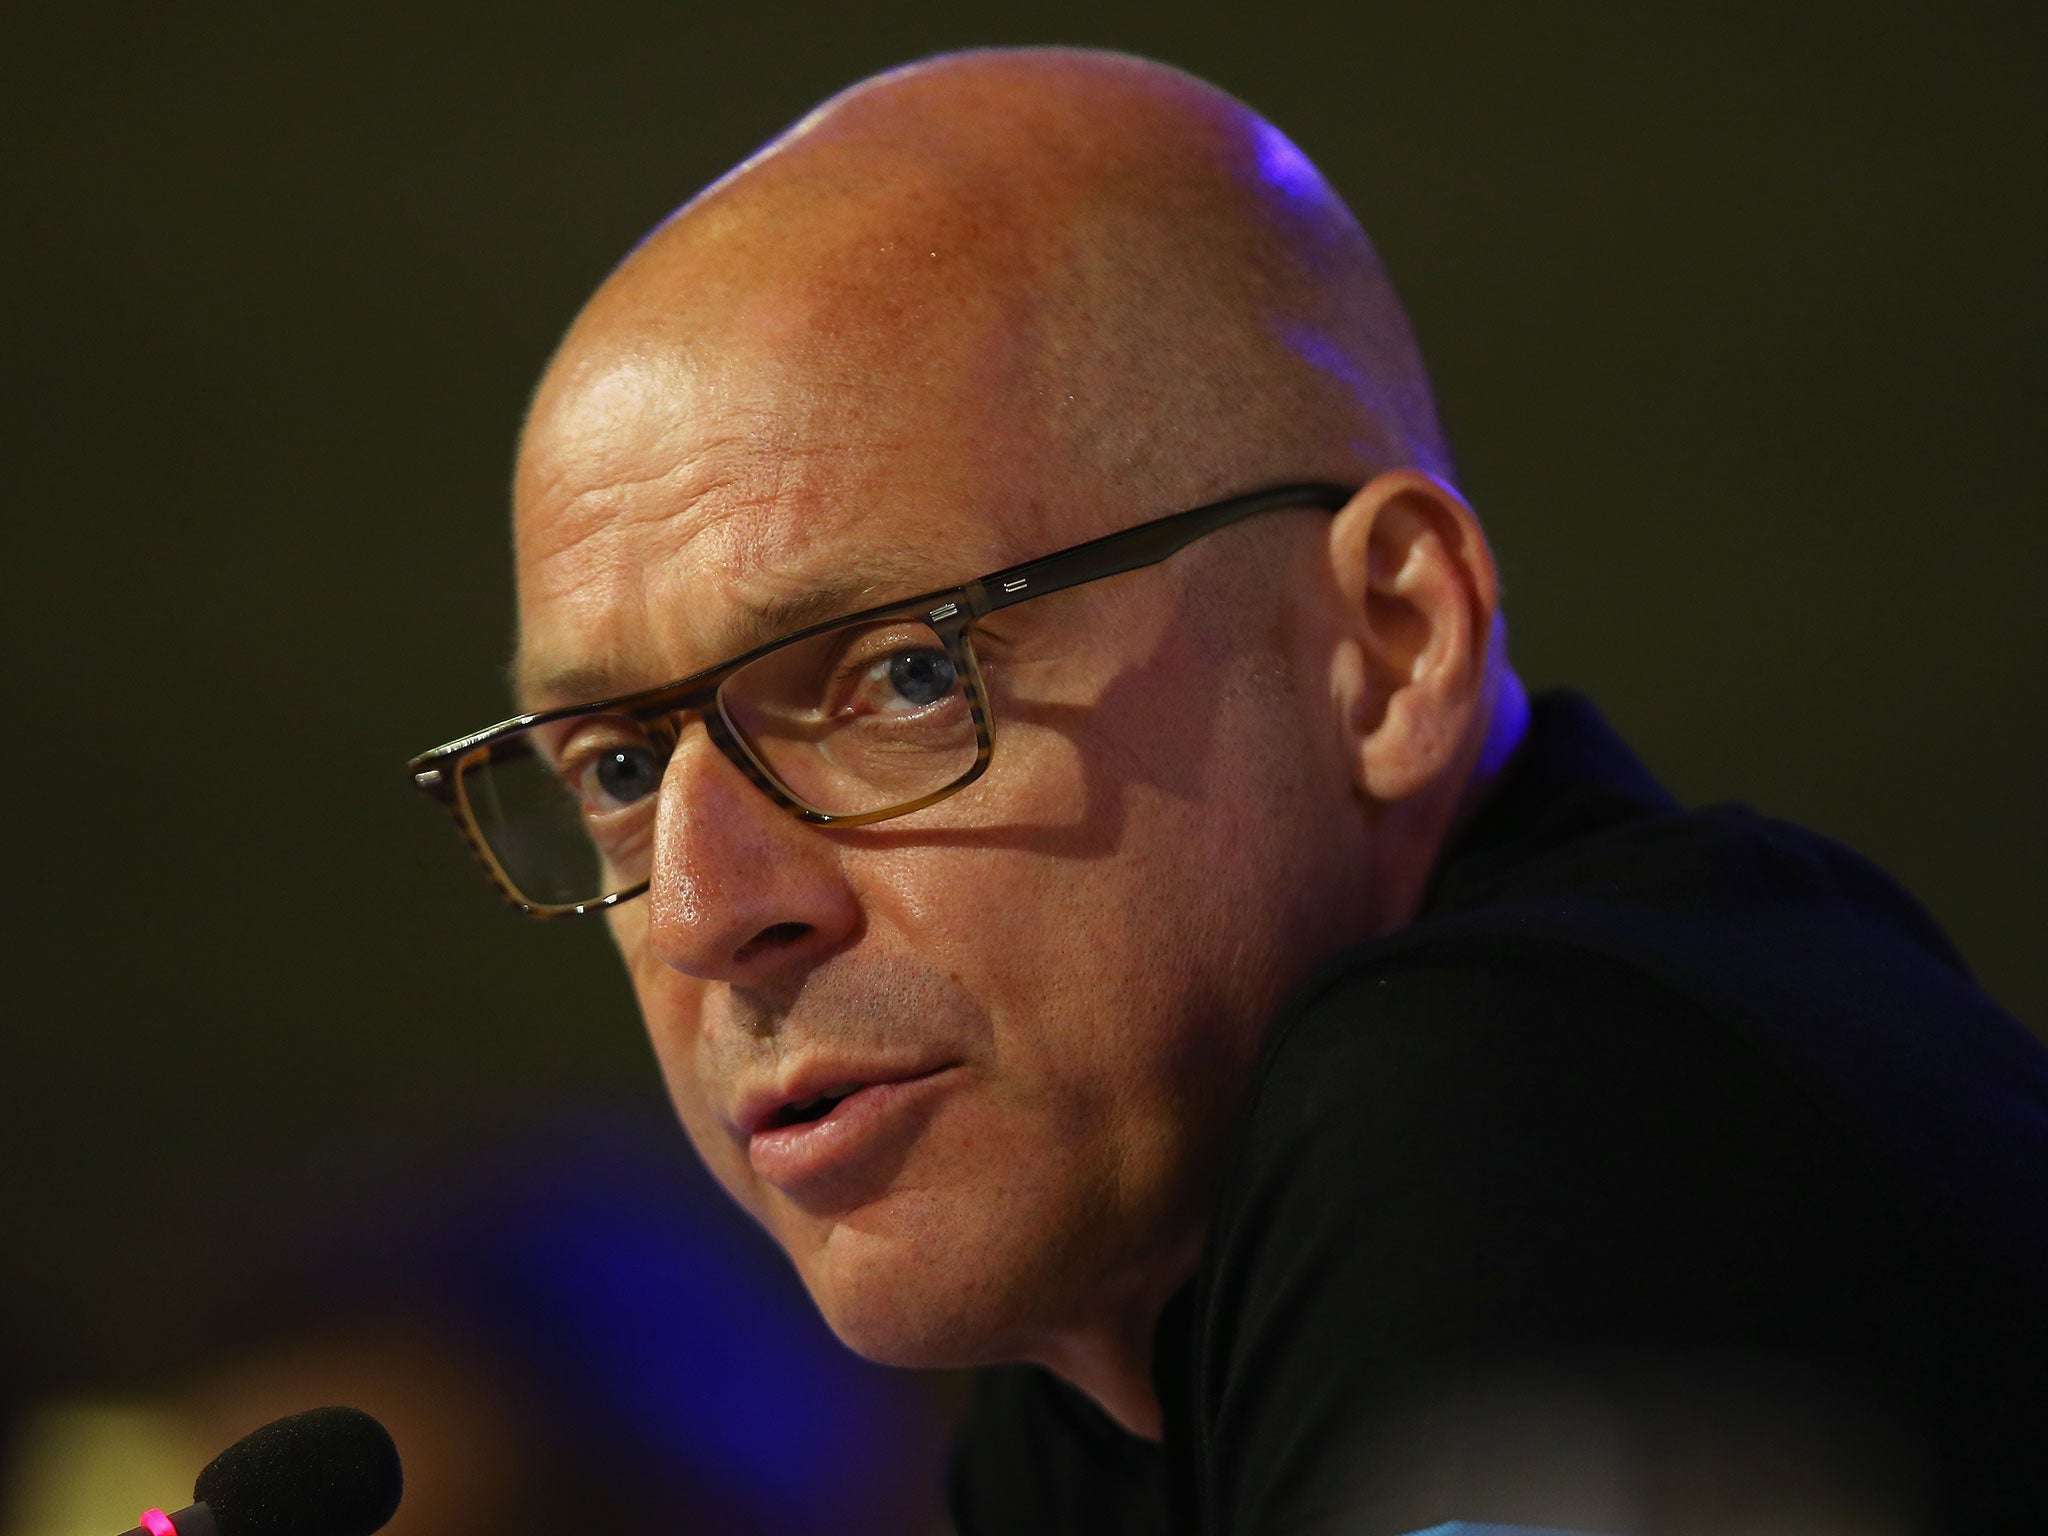 Dave Brailsford and his team have come under immense scrutiny in recent months